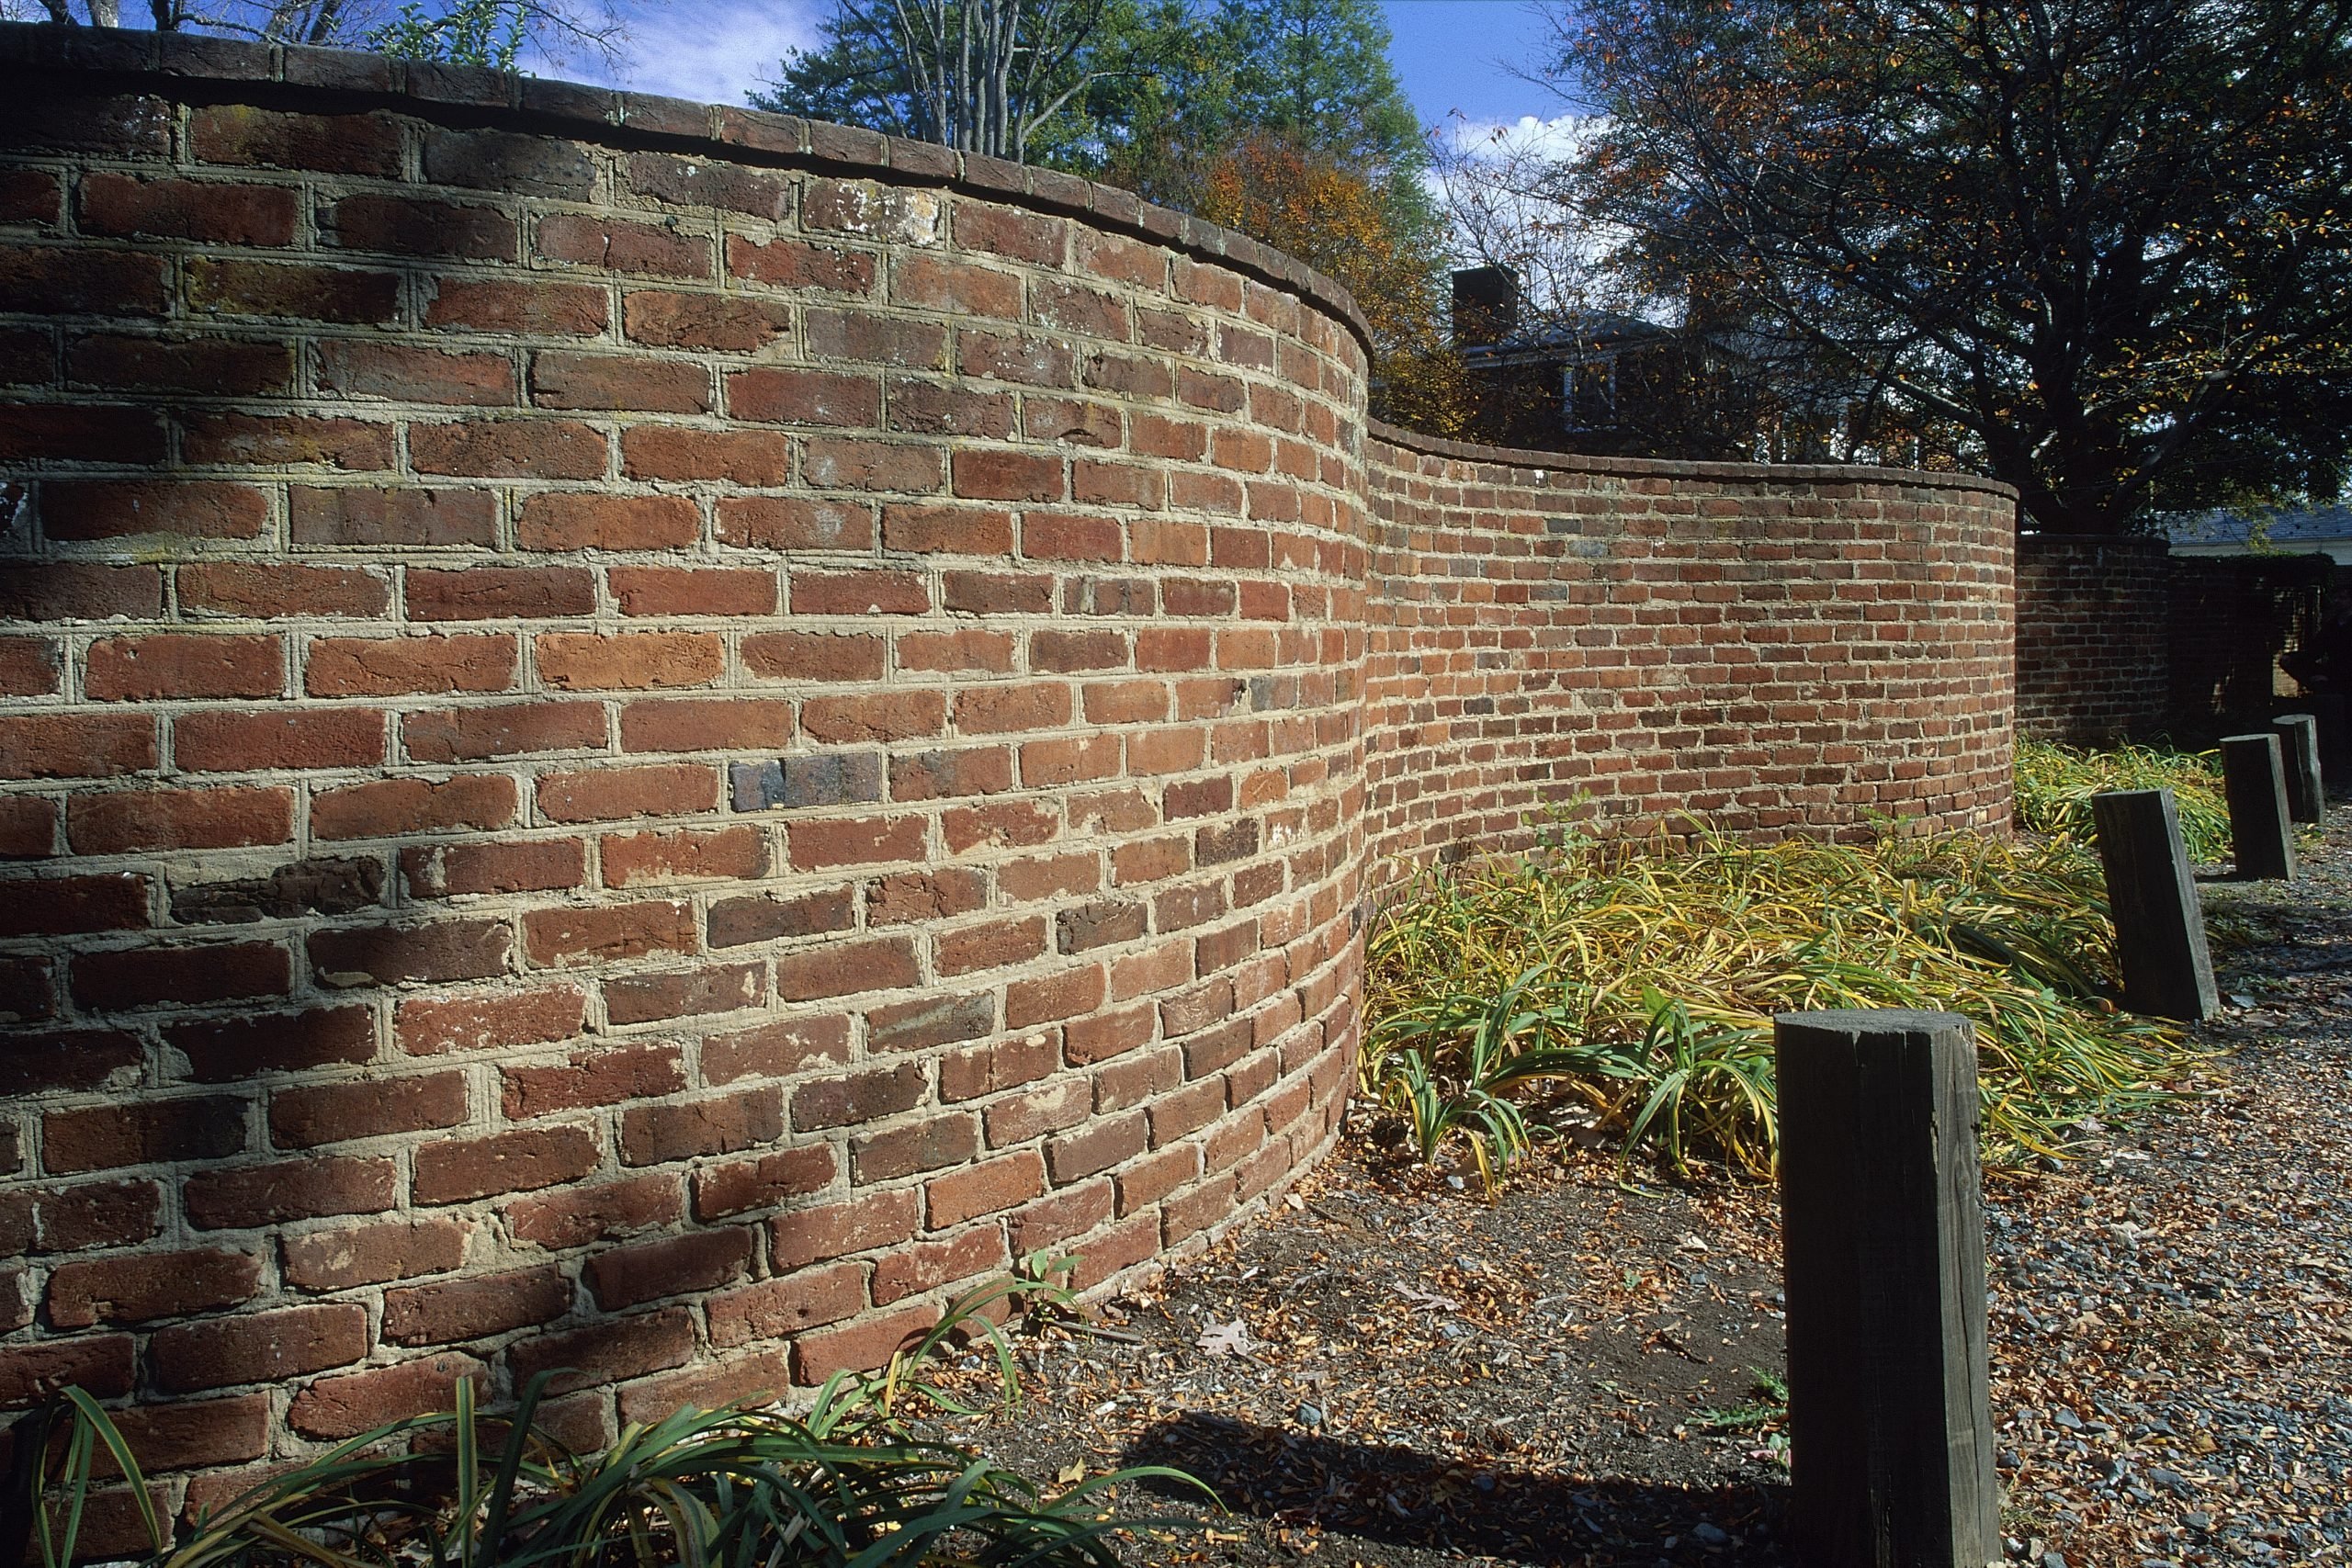 If You See a Wavy Brick Wall, This is What It Means